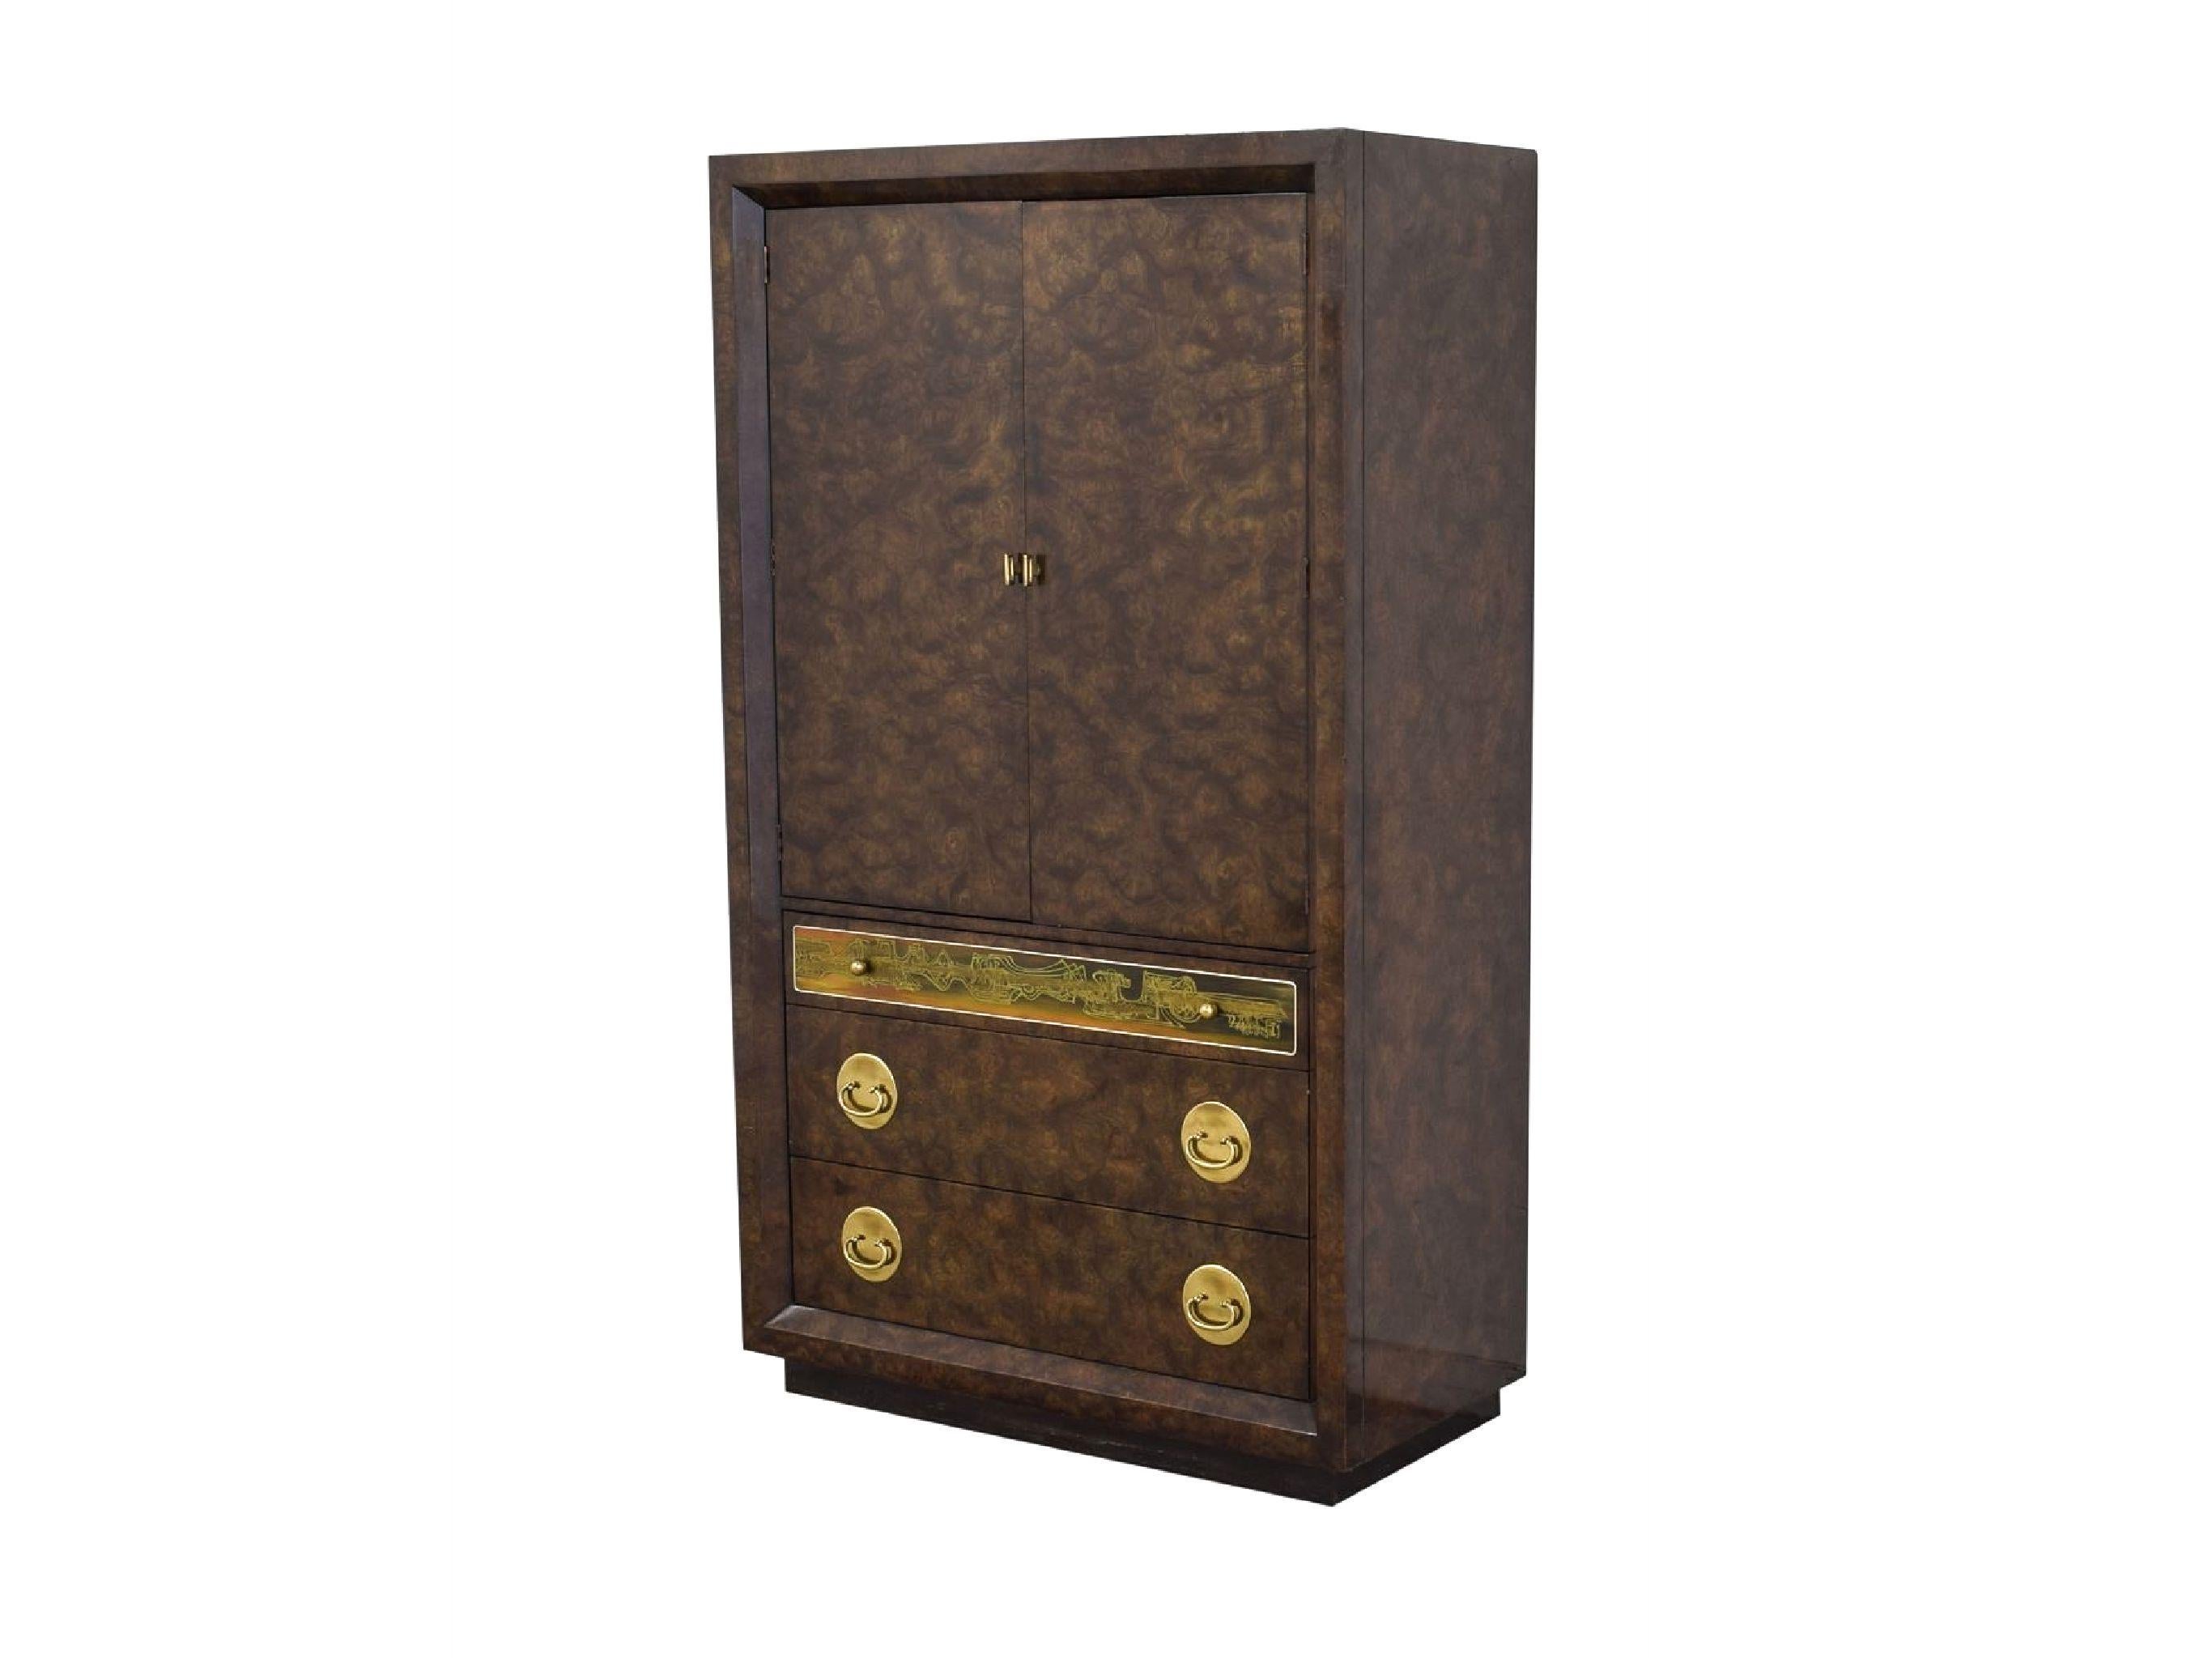 Mastercraft Amboyna burl and etched brass tallboy cabinet chest by Bernard Rohne. Three drawers at base. The double-doored upper compartment opens to three drawers and a shelf. Rich original finish and lovely acid-etched brass panel and hardware.